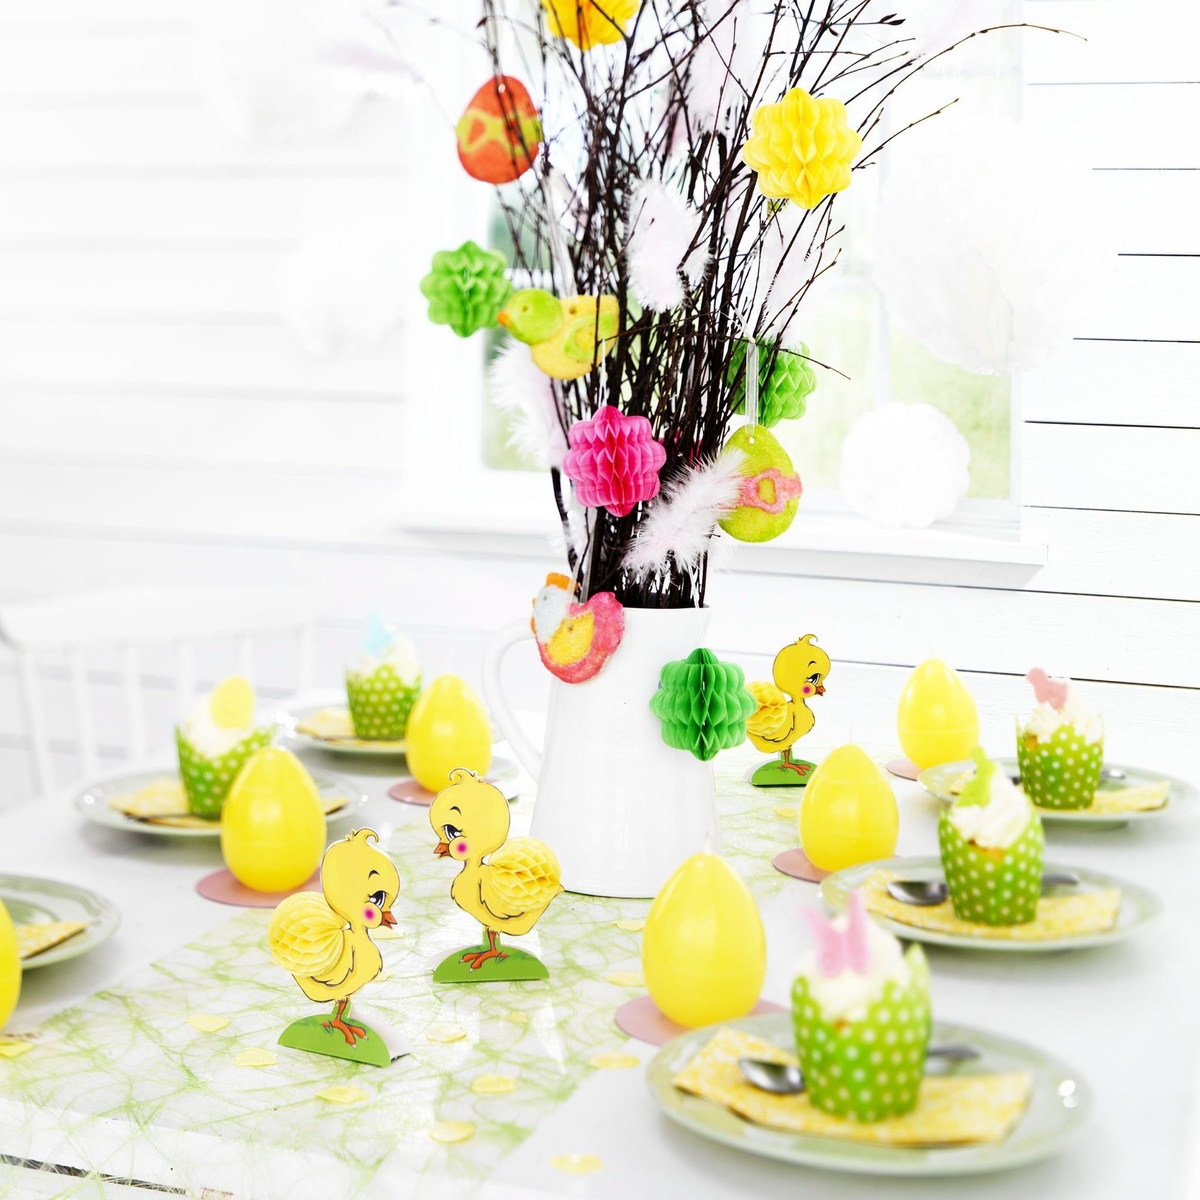 Decorate with edible decor